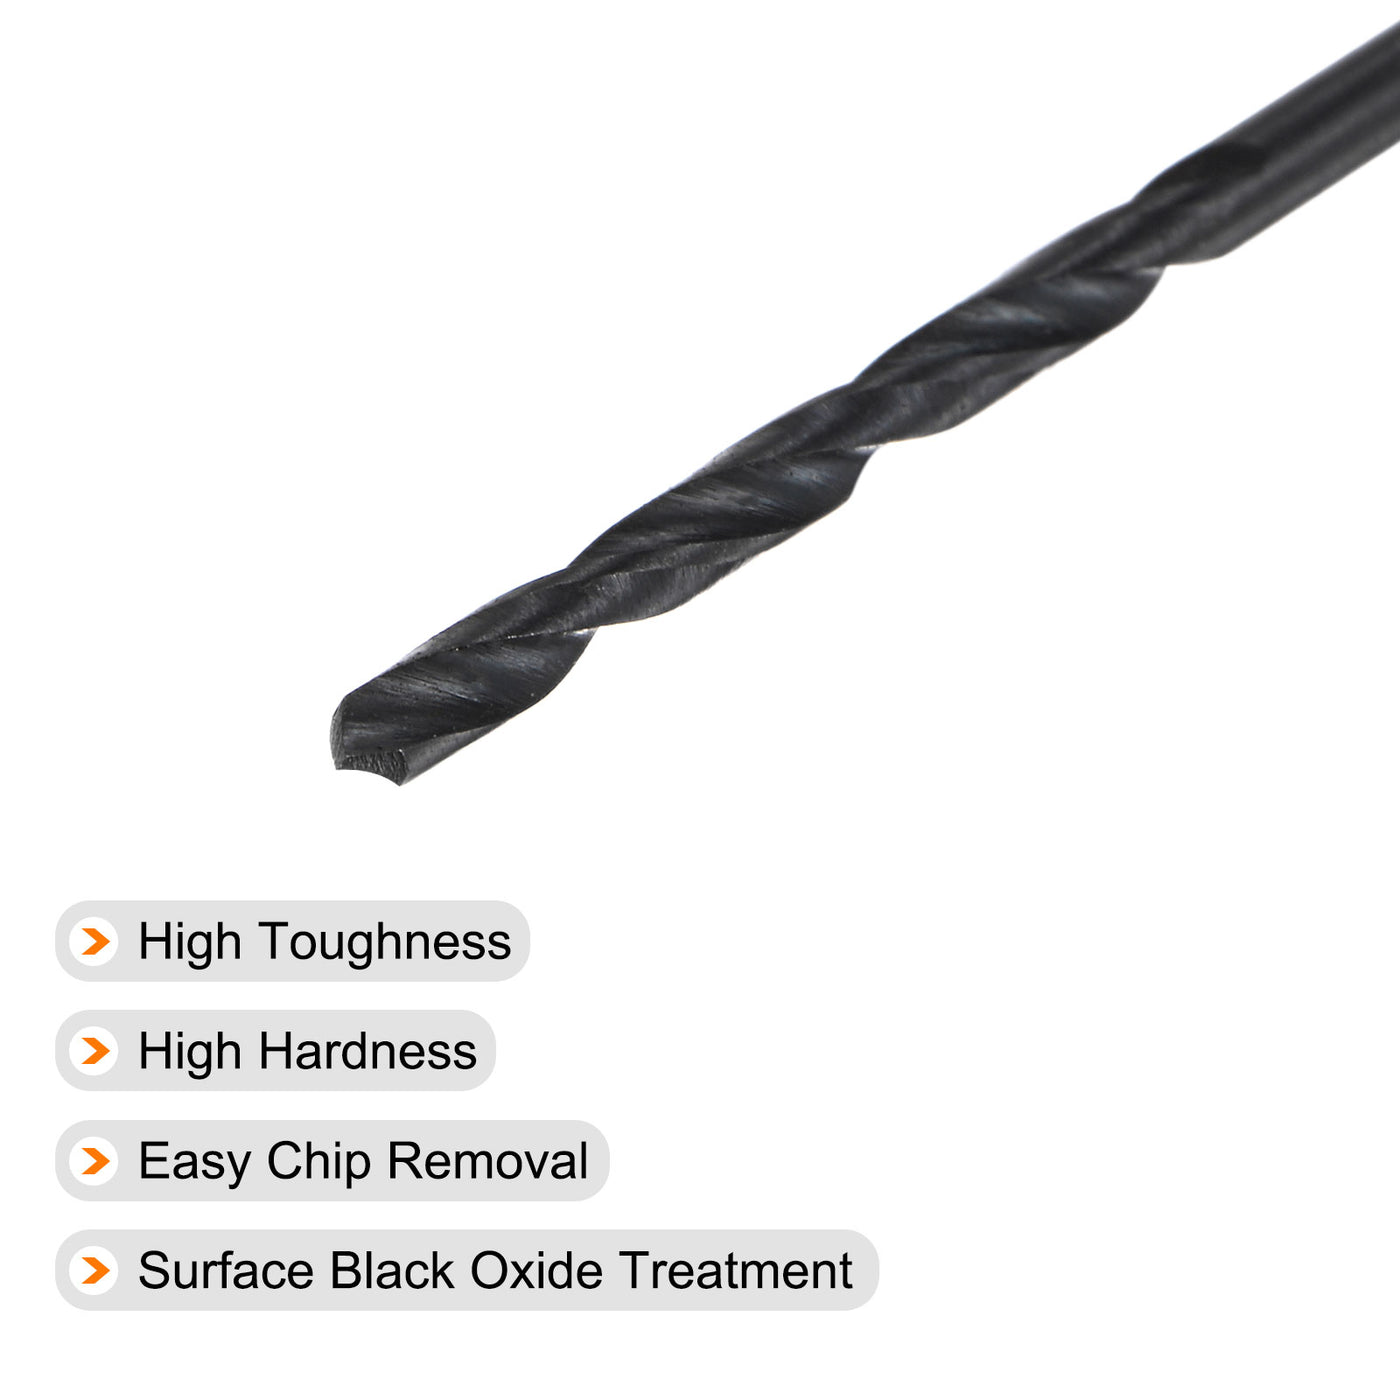 uxcell Uxcell High Speed Steel Twist Drill Bit, 1.9mm Fully Ground Black Oxide 45mm Long 5Pcs